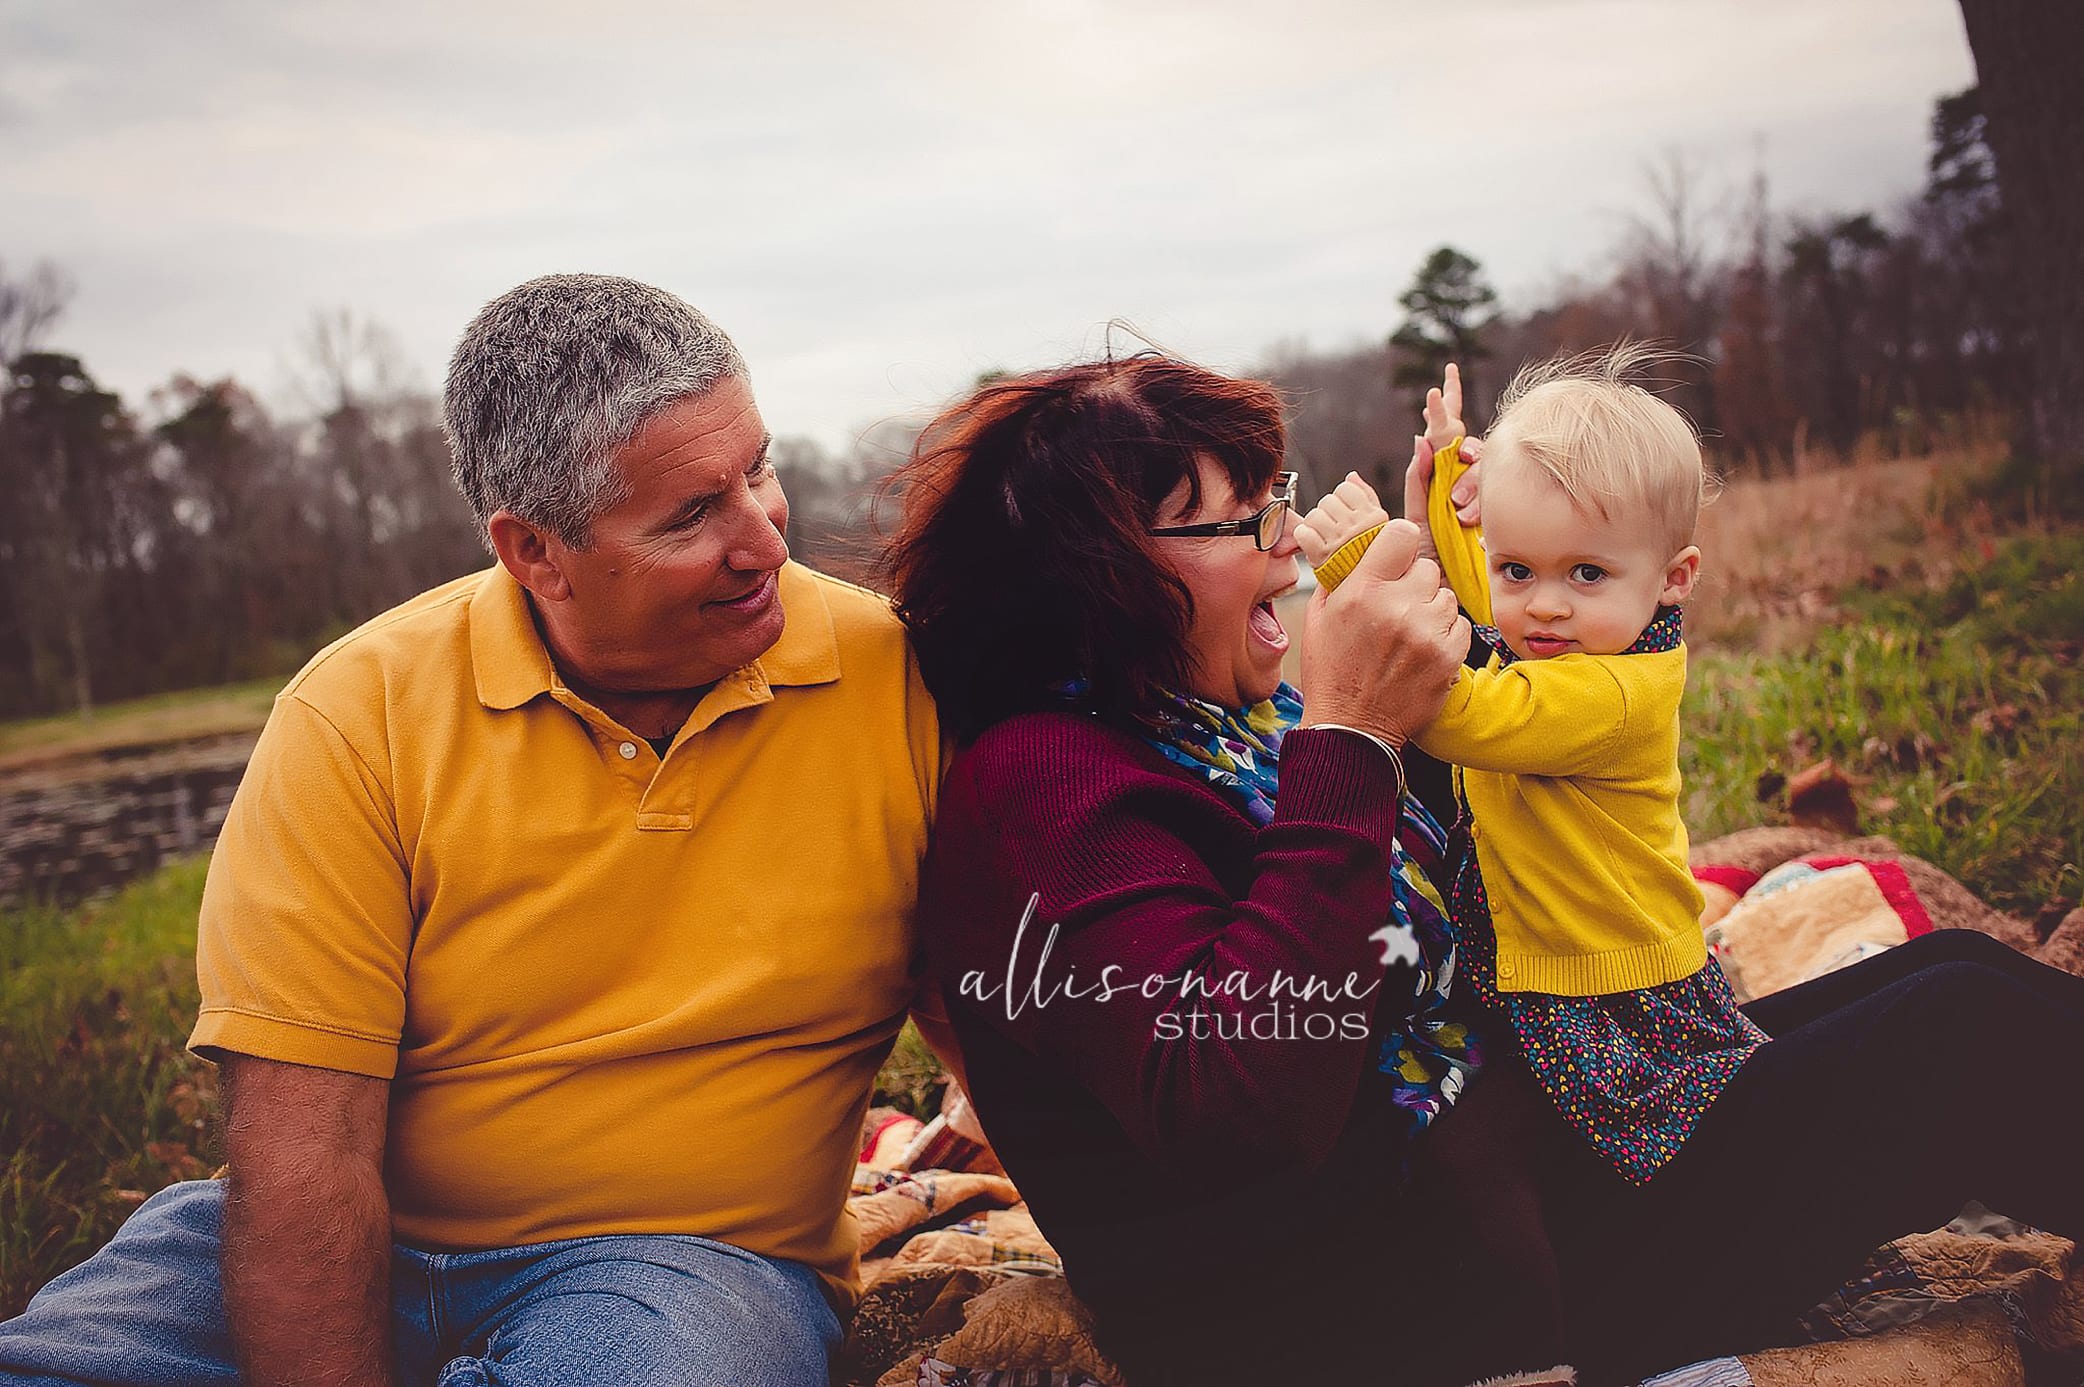 Allison Gallagher, AllisonAnne Studios, South Jersey, Family Photography, Hammonton, Pottery Barn Kids, multi-generational, Grandmom is cool, First Year Journey, Callie, love, outdoors